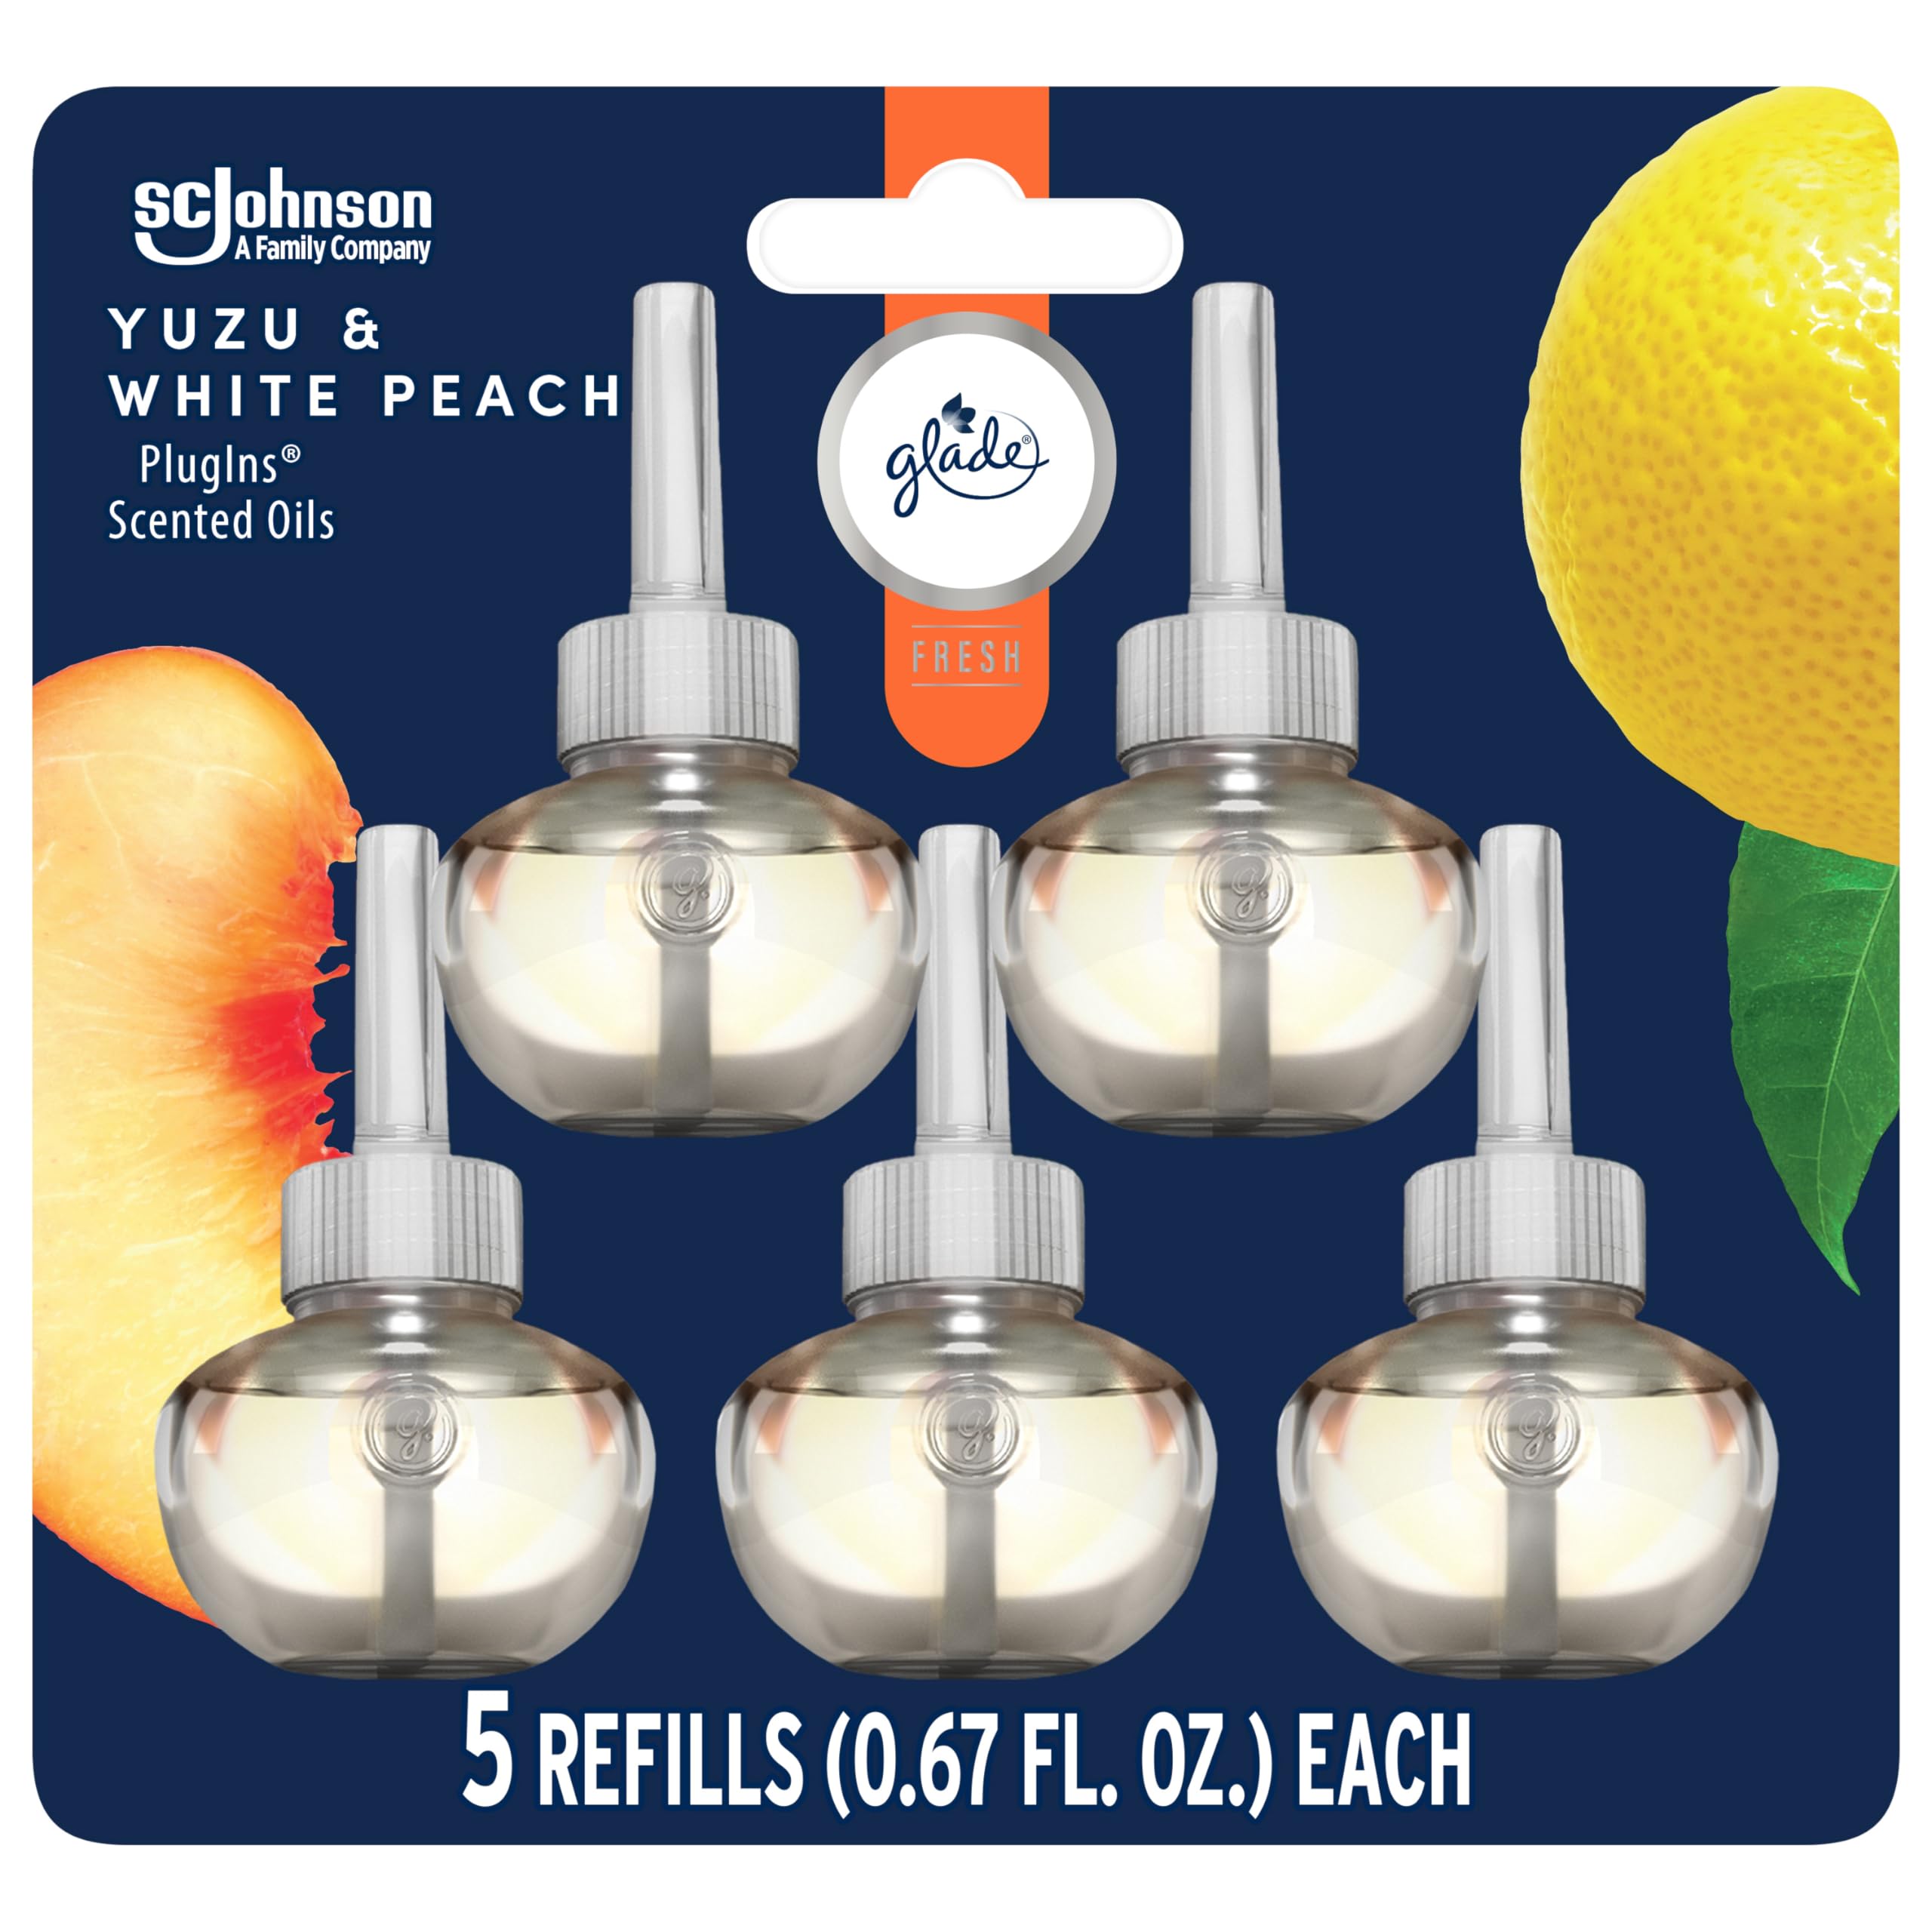 Glade PlugIns Refills Air Freshener, Scented and Essential Oils for Home and Bathroom, Yuzu & White Peach, Fresh Collection 3.35 Fl Oz, 5 Count